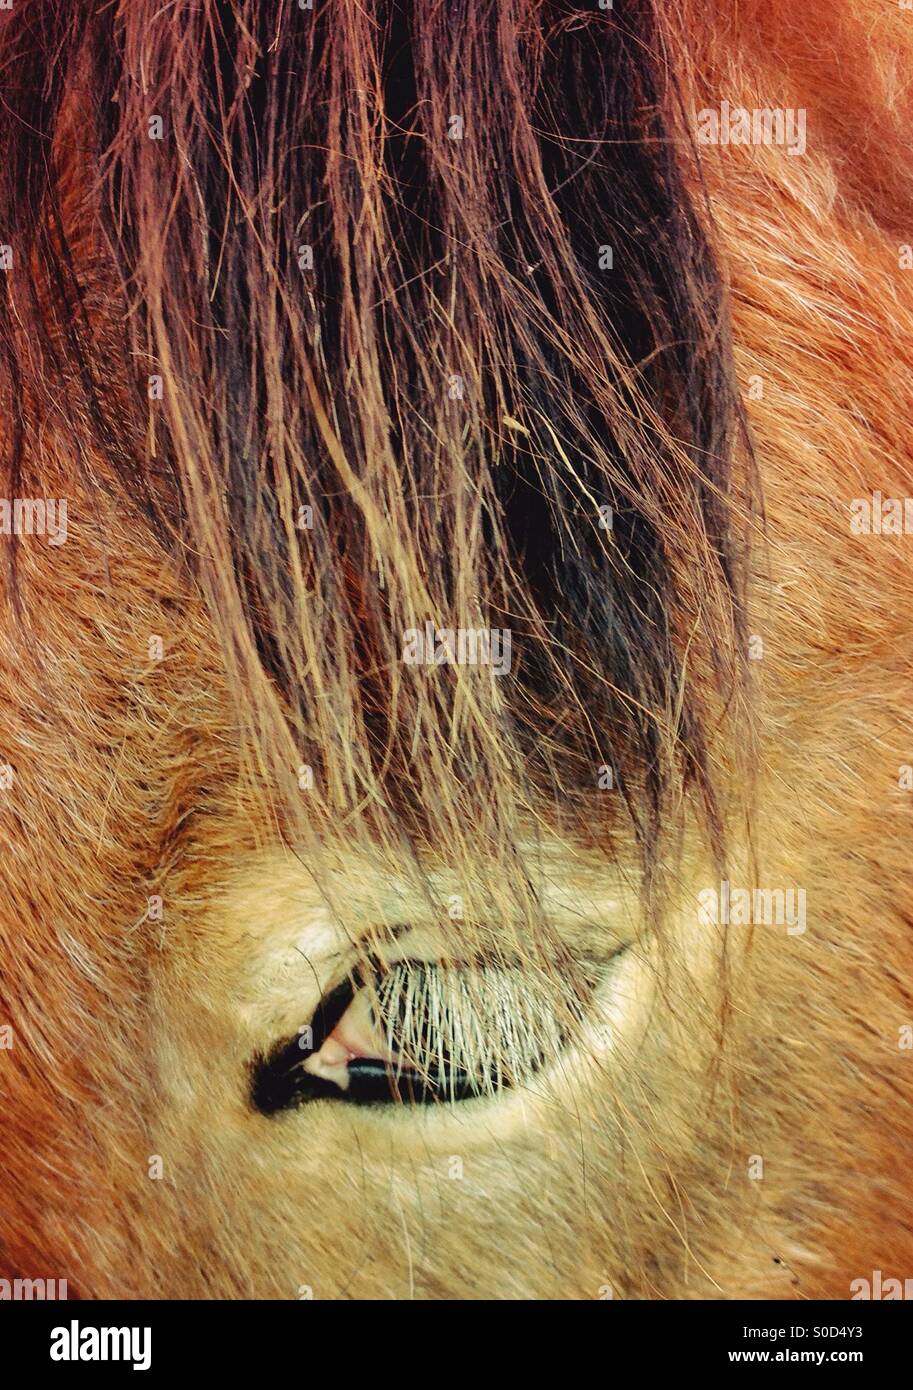 Close up of a Horse's eye Banque D'Images